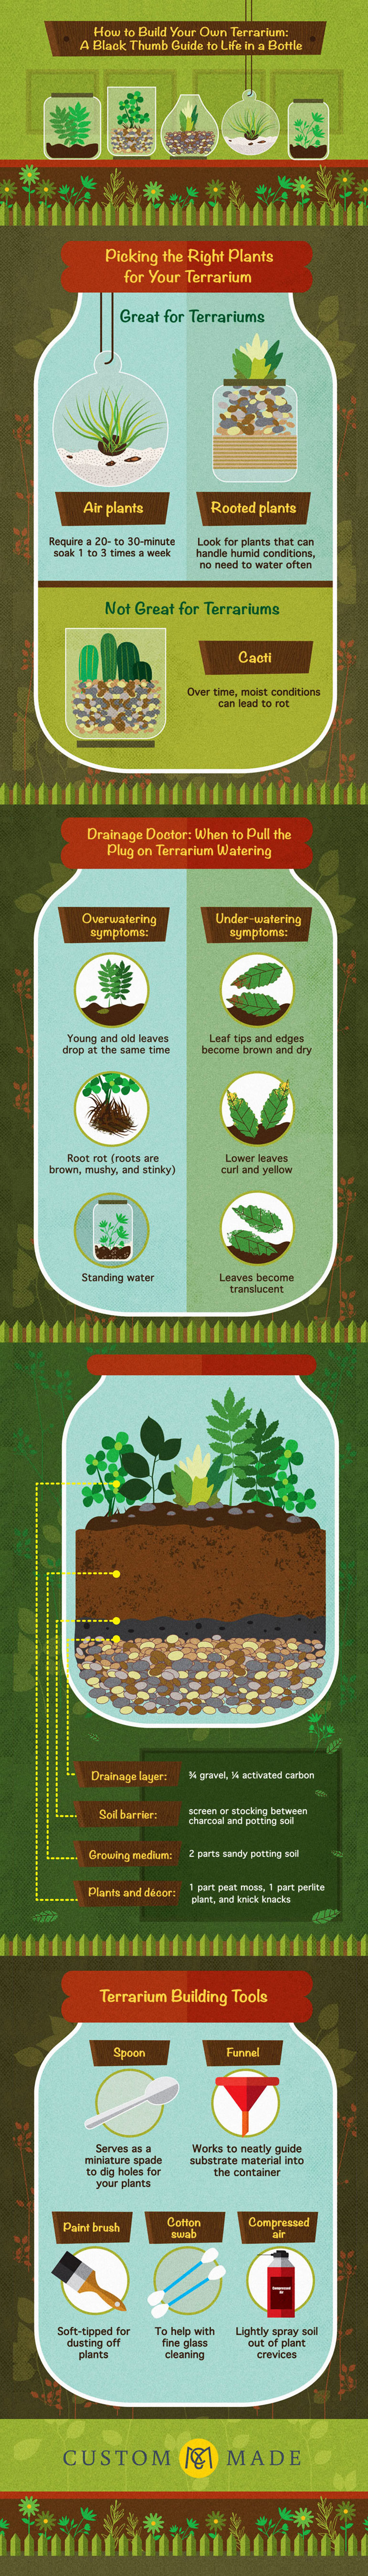 How to Make a Plant Terrarium - Gardening Infographic